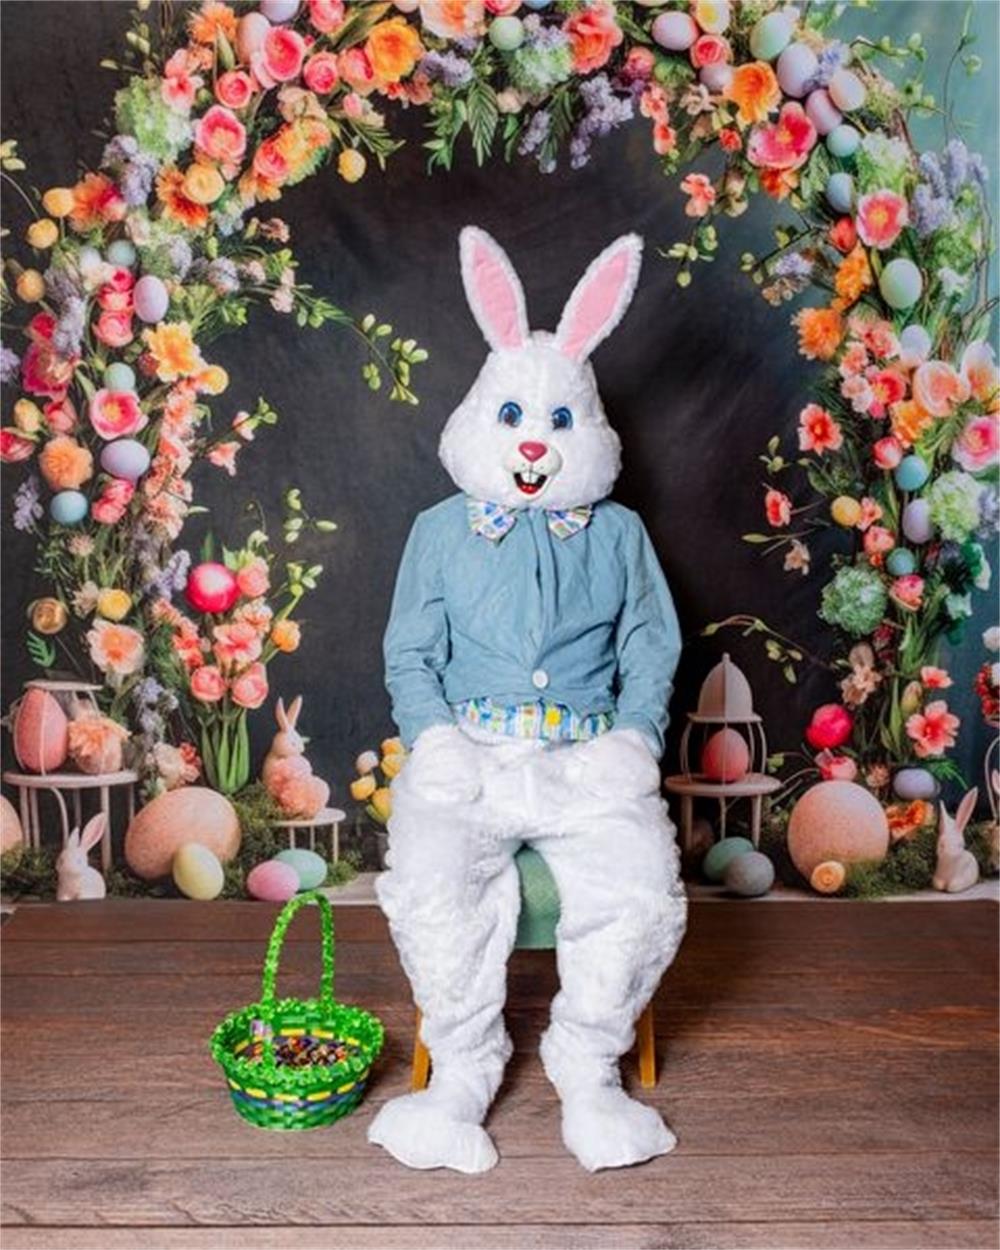 Kate Easter Eggs Bunny Colorful Flowers Arch Backdrop Designed by Lidia Redekopp